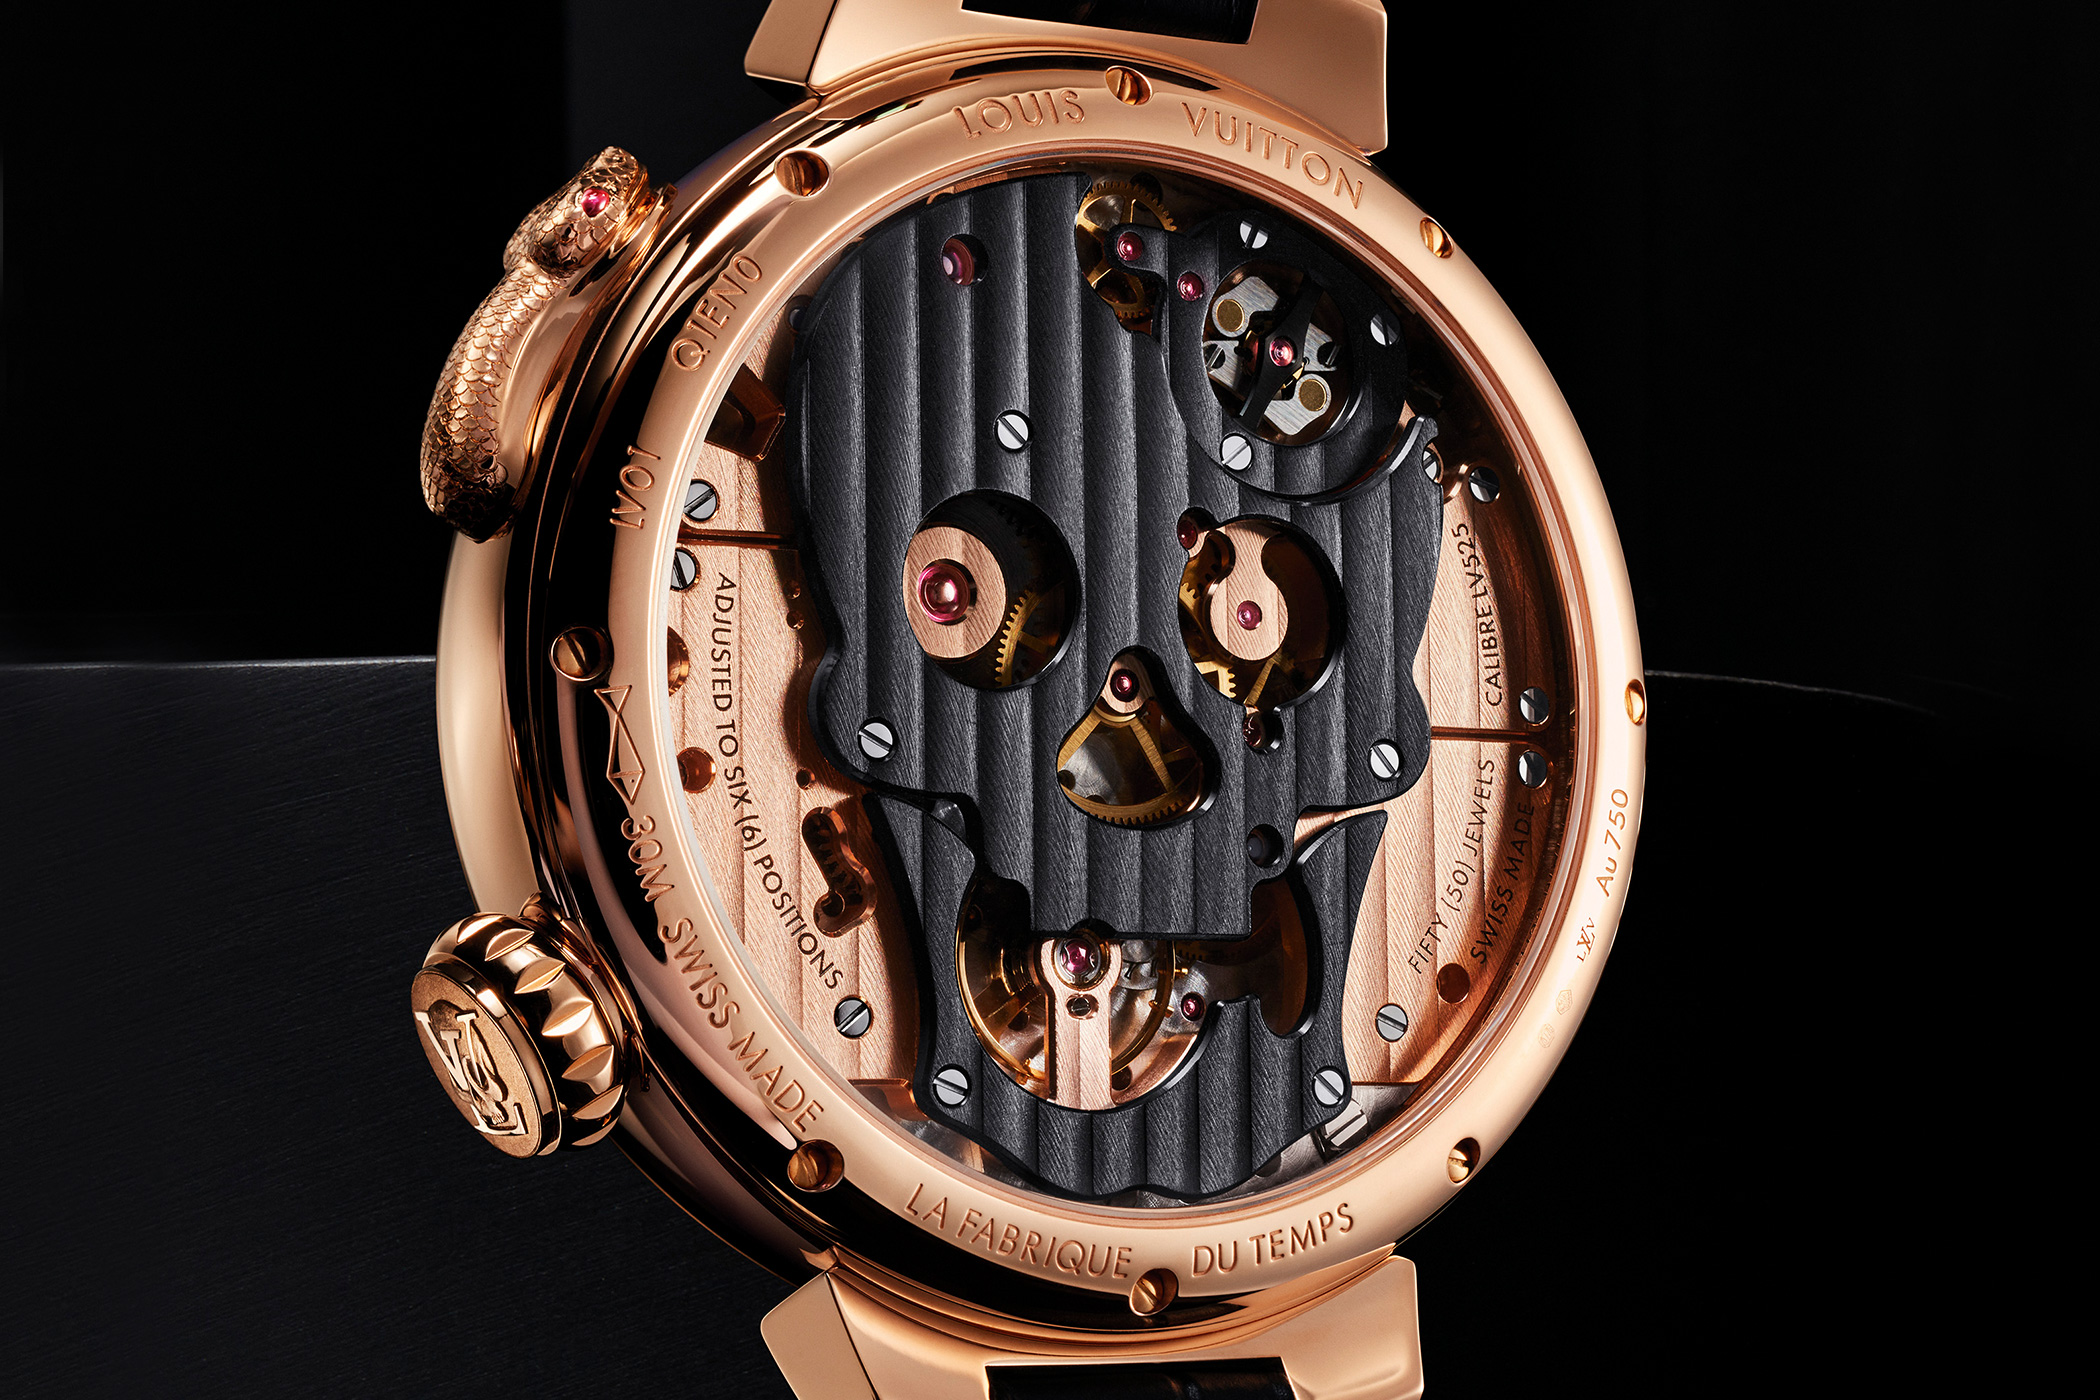 Louis Vuitton has unveiled its most futuristic watch yet